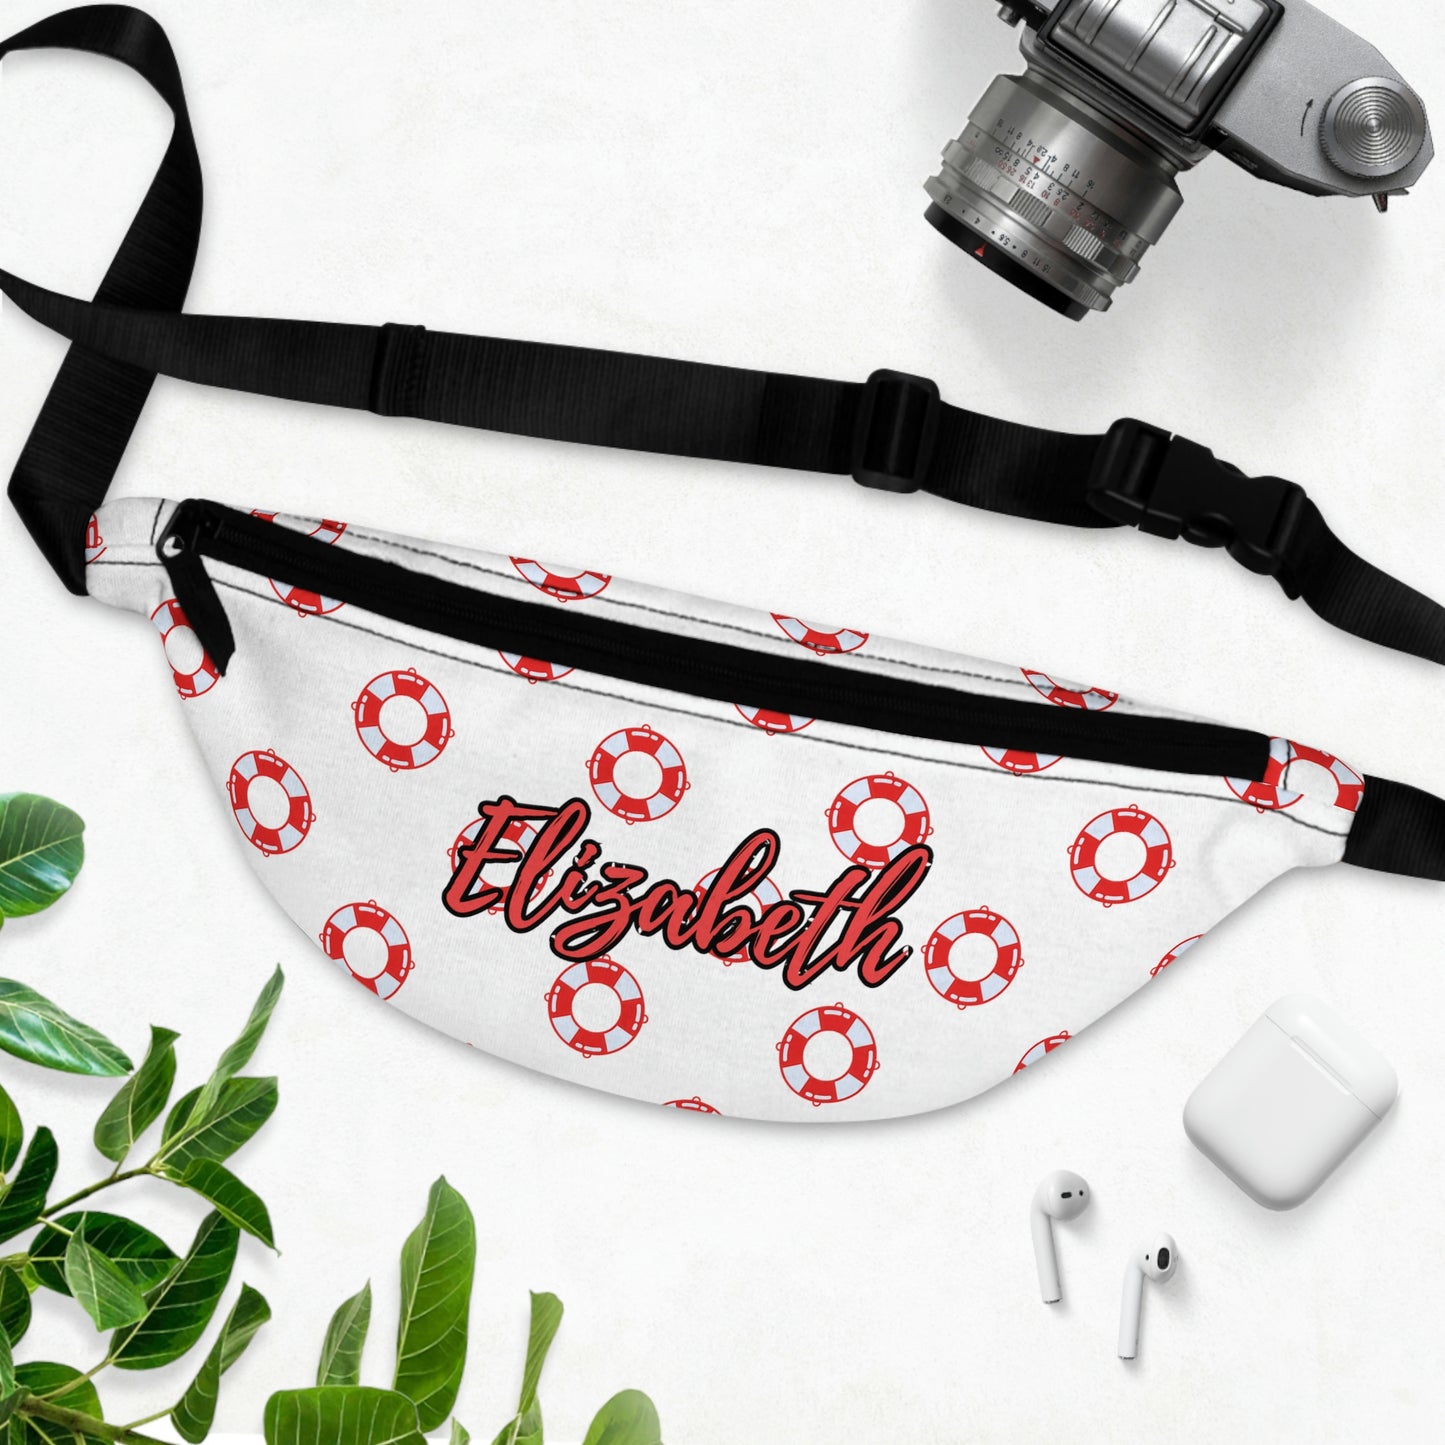 Rings of Life Lifeguard Personalized Fanny Pack